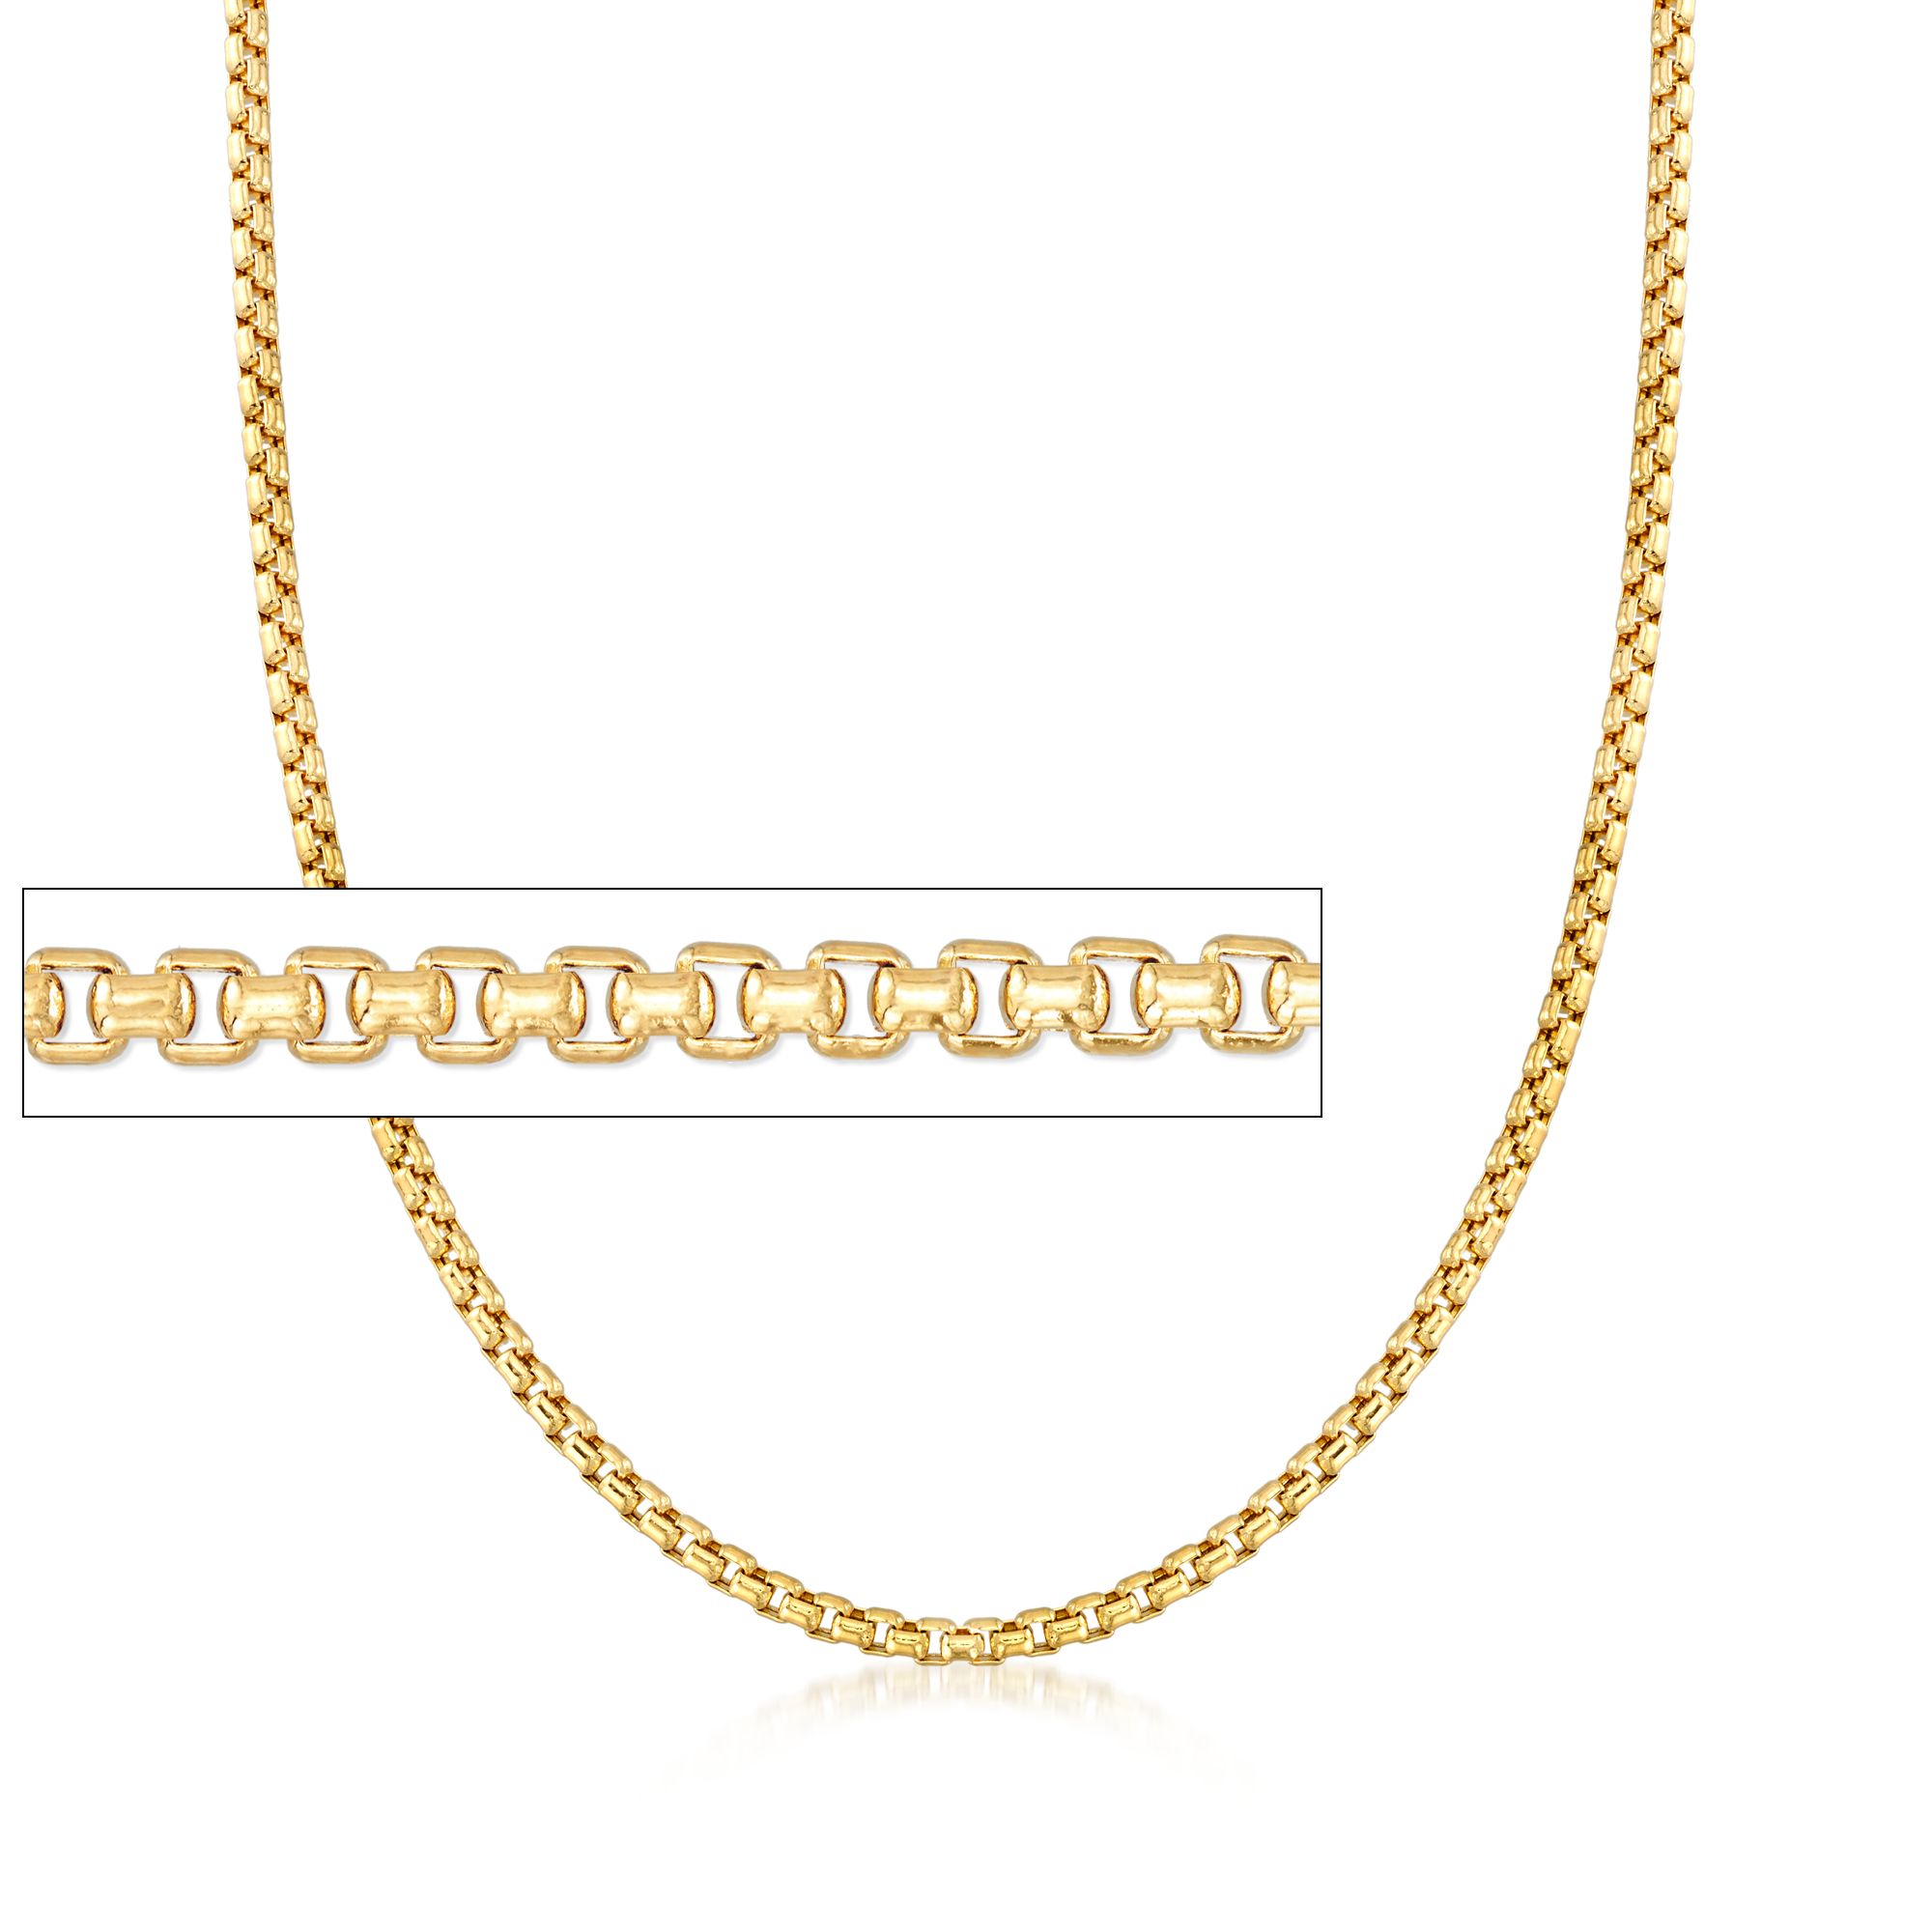 Men's 3.5mm 14kt Yellow Gold Box Chain Necklace